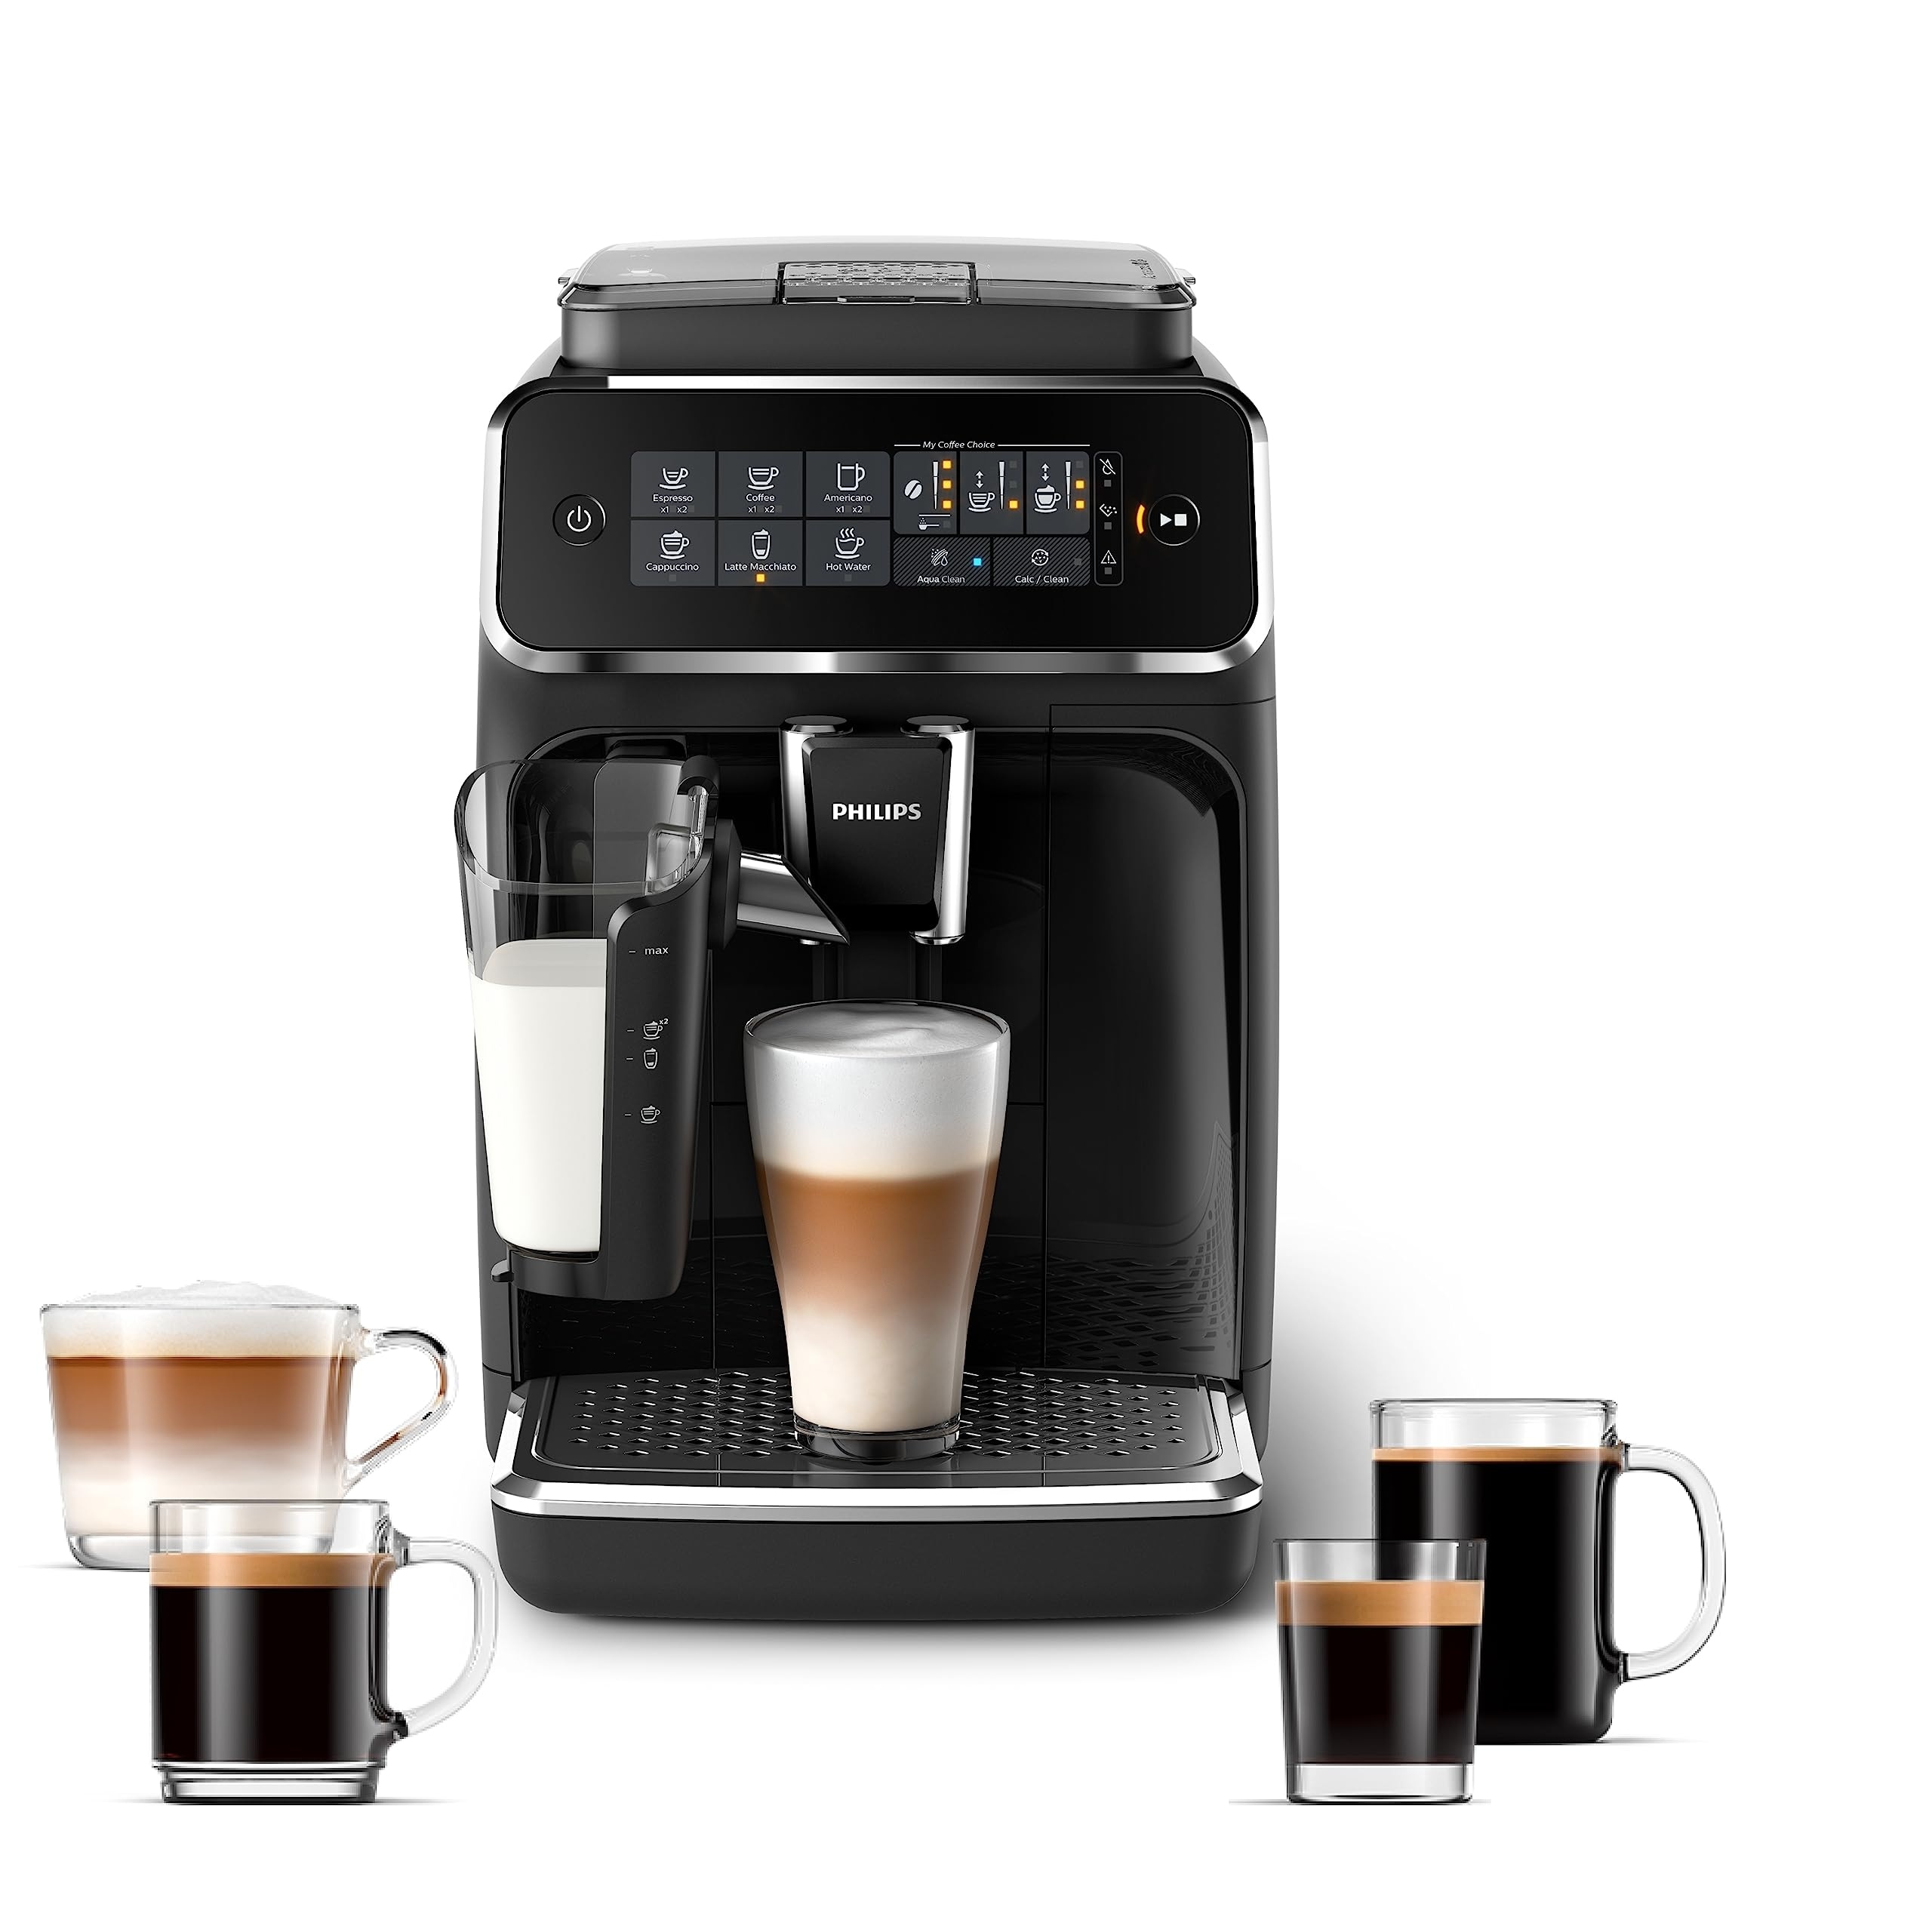 https://ak1.ostkcdn.com/images/products/is/images/direct/12fd0db0b464840cc2a66546ae9749257053b872/3200-Series-Fully-Automatic-Espresso-Machine%2C-Milk-Frother%2C-5-Coffee-Varieties%2C-Intuitive-Touch-Display%2C-100%25-Ceramic-Grinder.jpg